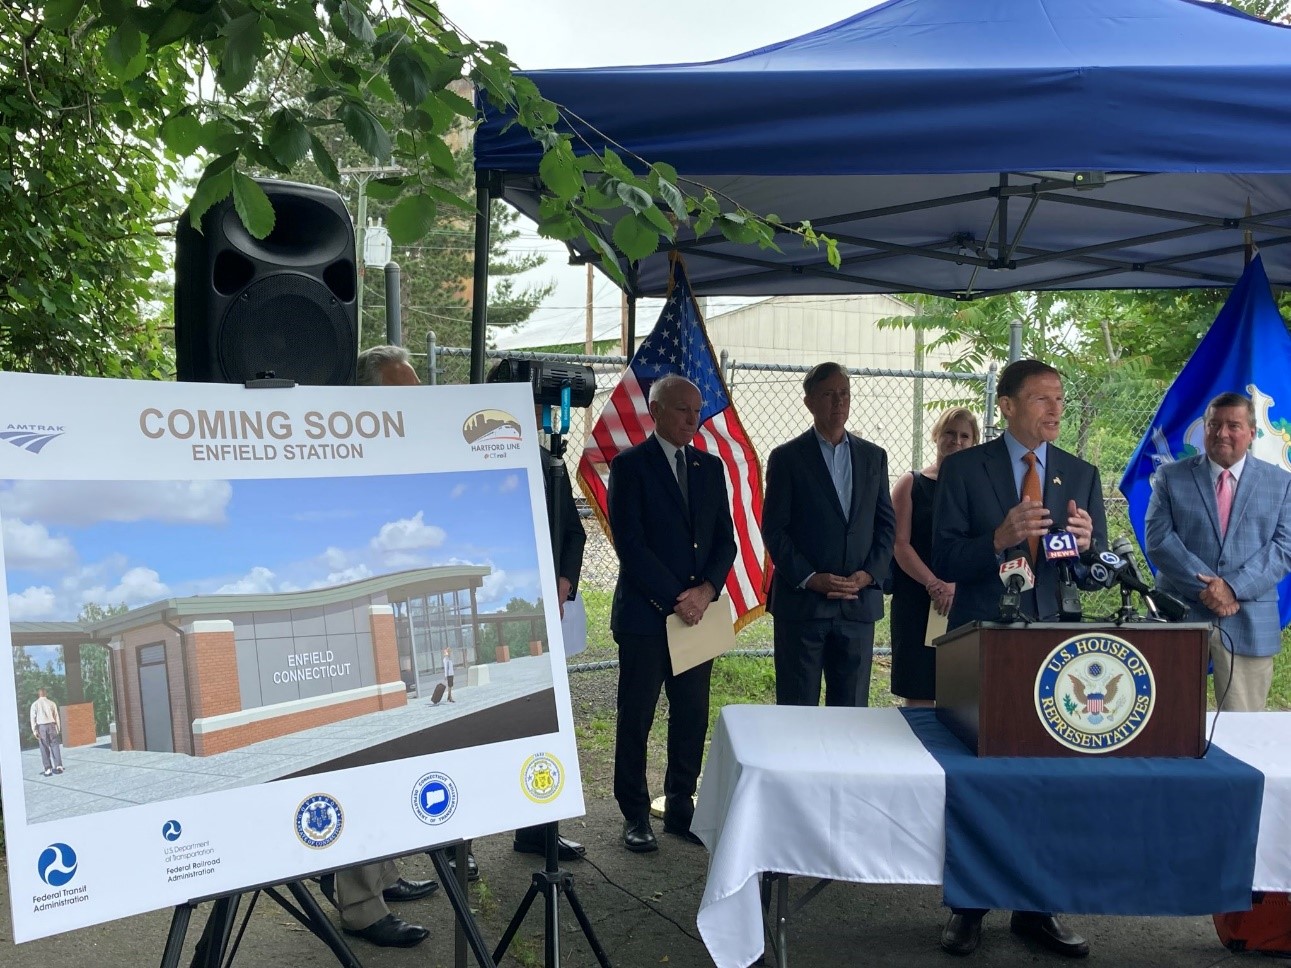 Blumenthal highlighted funding from federal grants and the Infrastructure Investment and Jobs Act that will bring major upgrades to Connecticut’s aging infrastructure. 